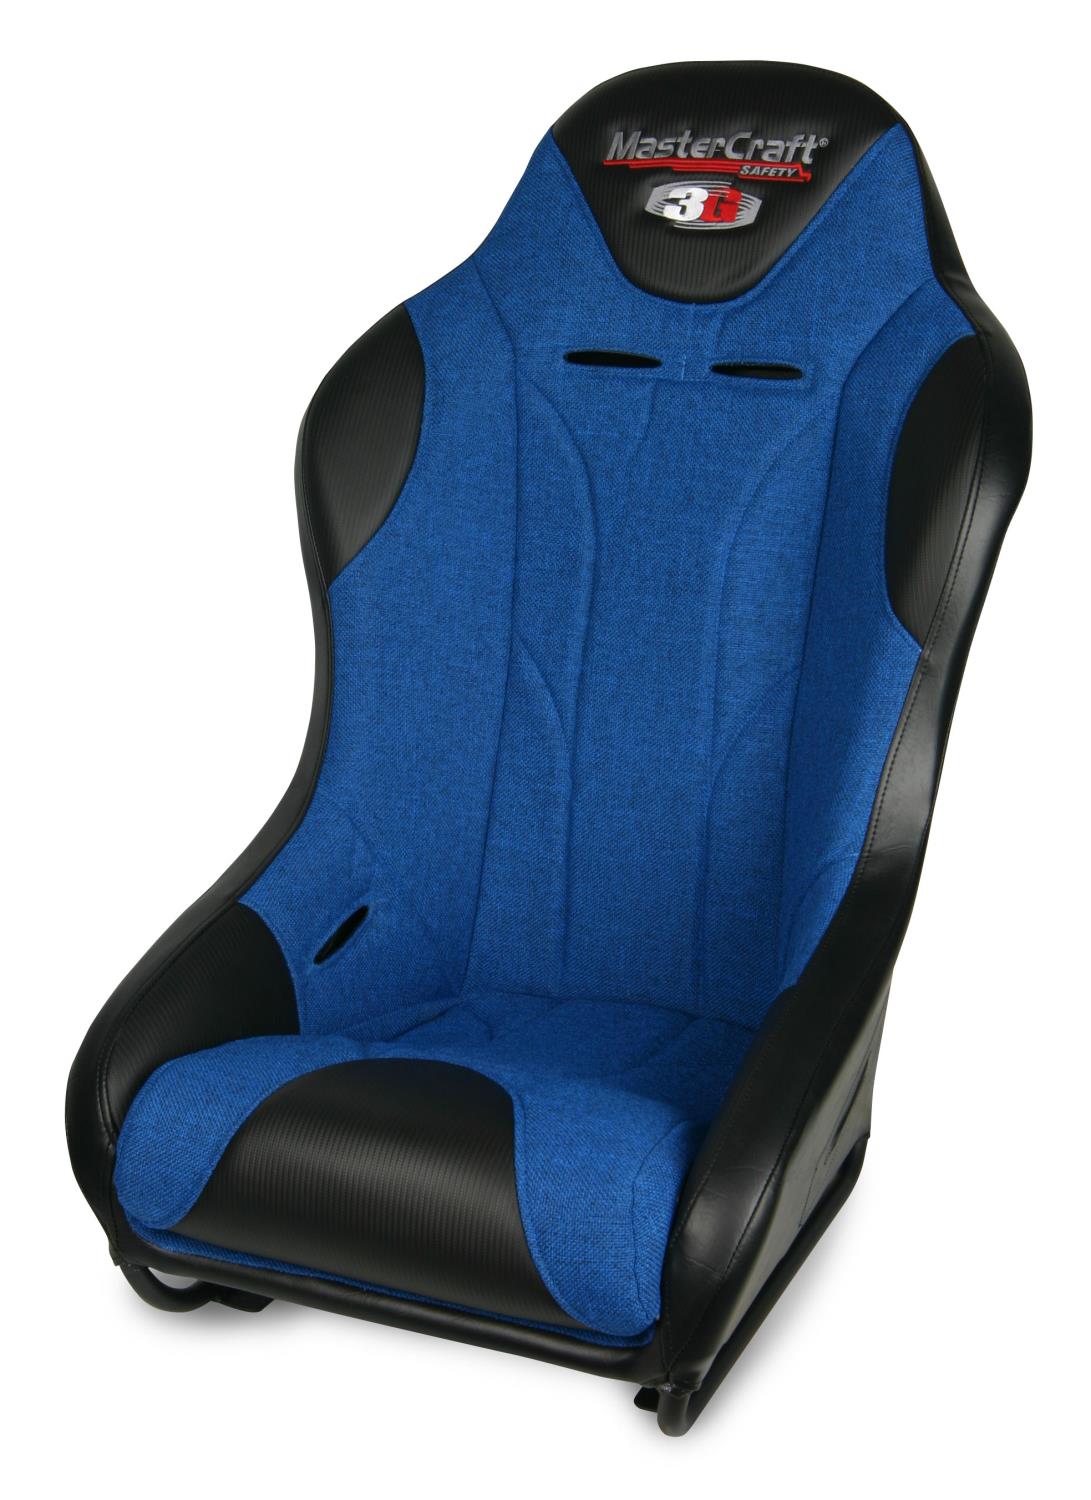 568023 1 in. WIDER 3G Seat w/DirtSport Stitch Pattern, Black with Blue Fabric Center and Blue Side Panels, Black Band